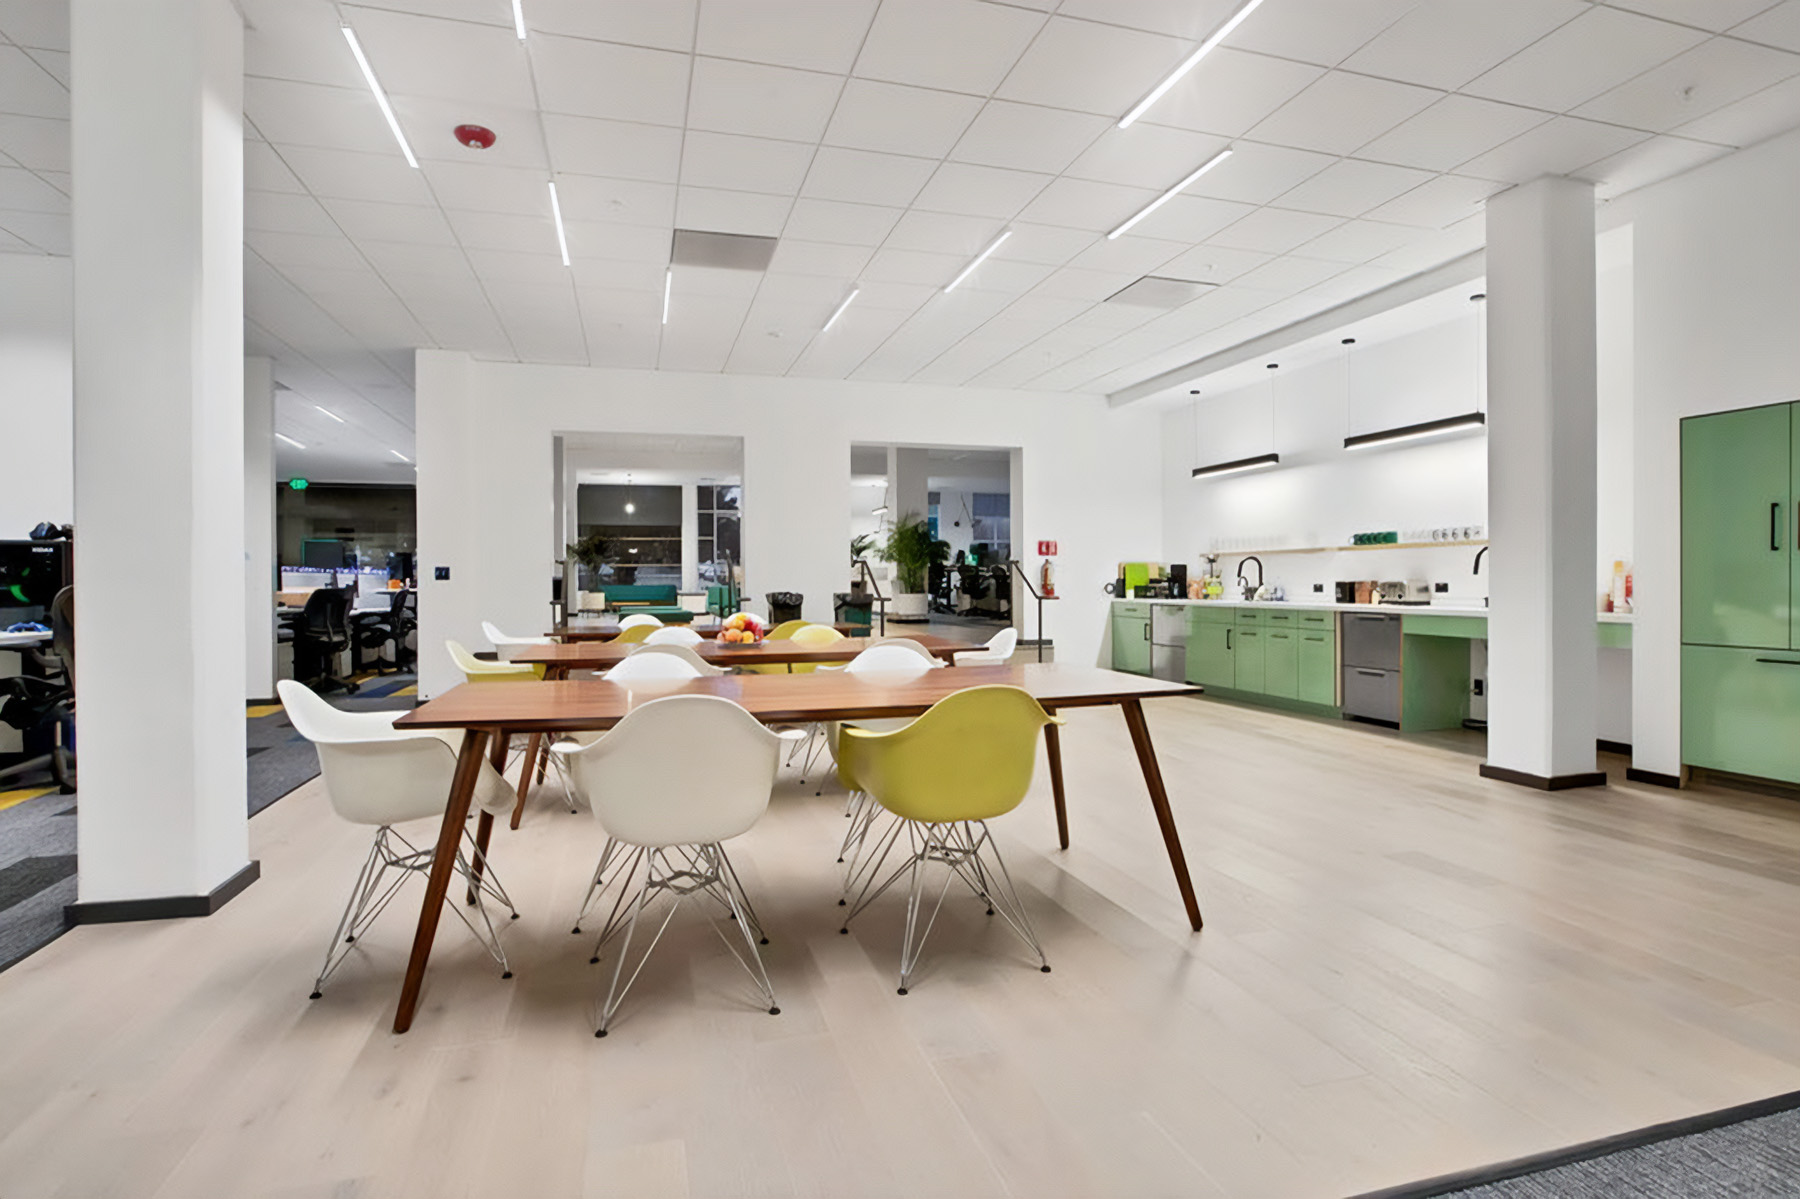 Tunable-white linear suspension light fixtures in common spaces also allow occupants in spaces like kitchen areas to create a more relaxing environment